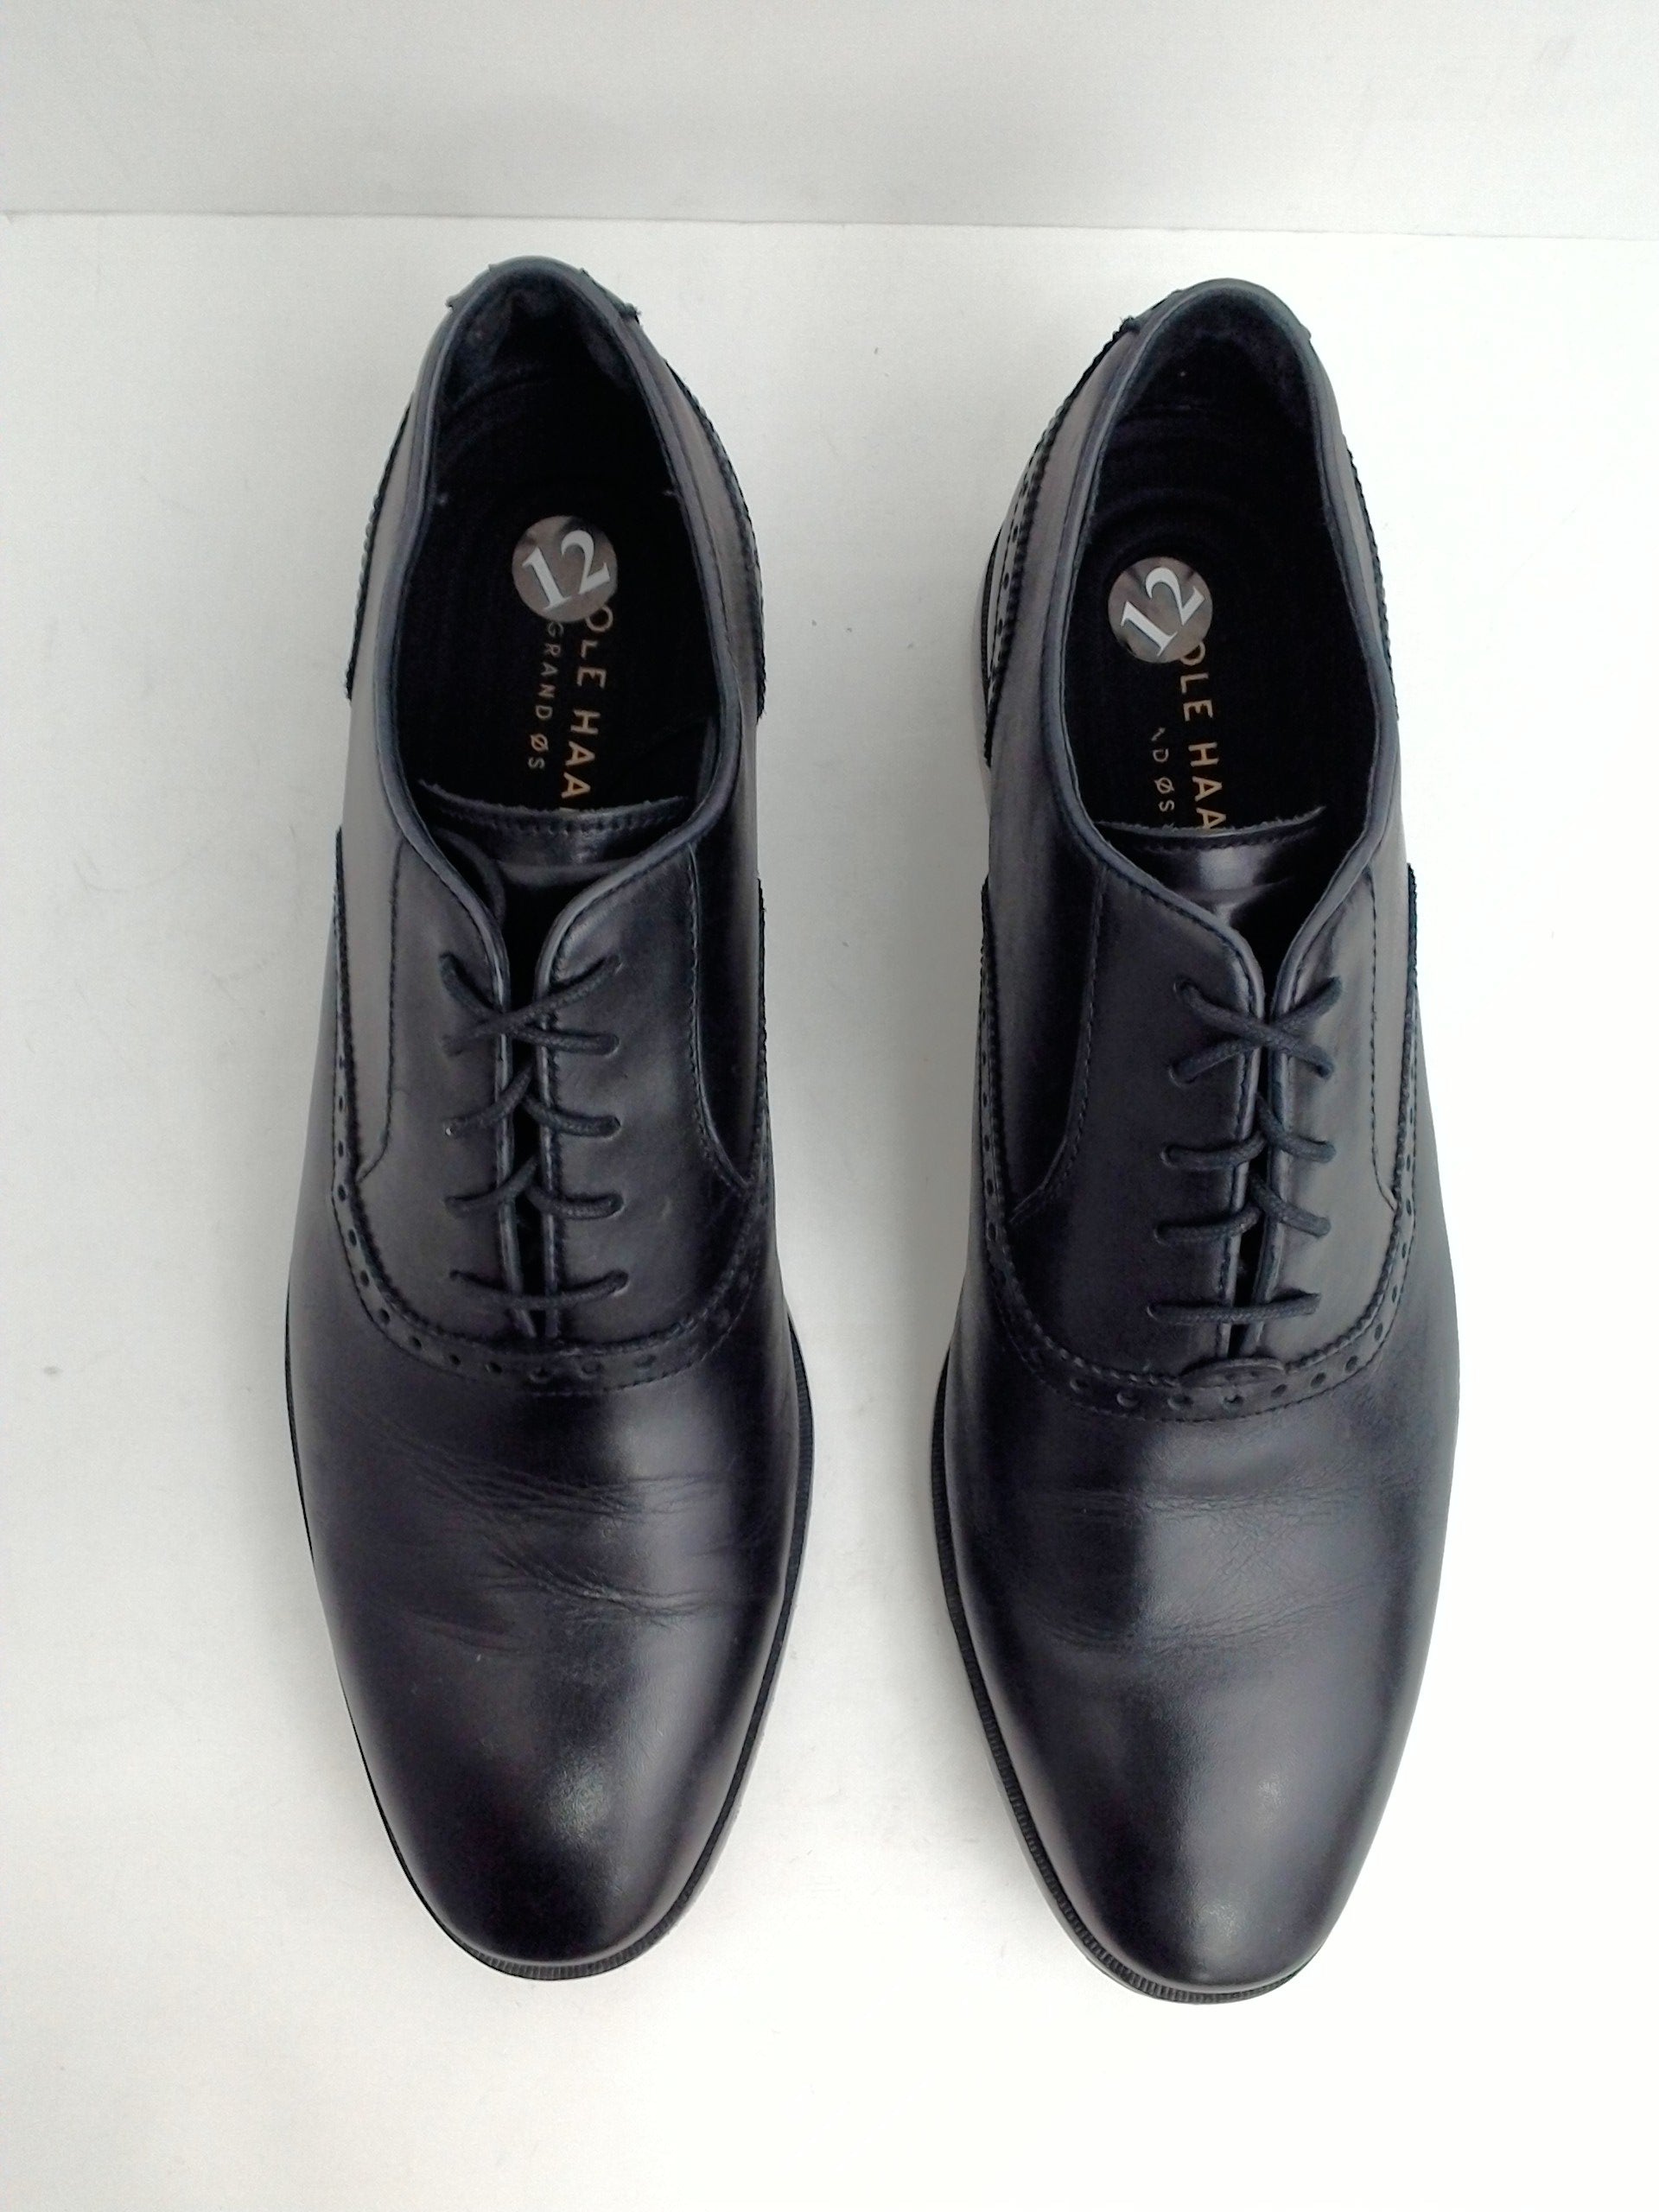 Rockport Men's Grand Oxford, Black, Leather Size 12 M - Prime Shoes and ...